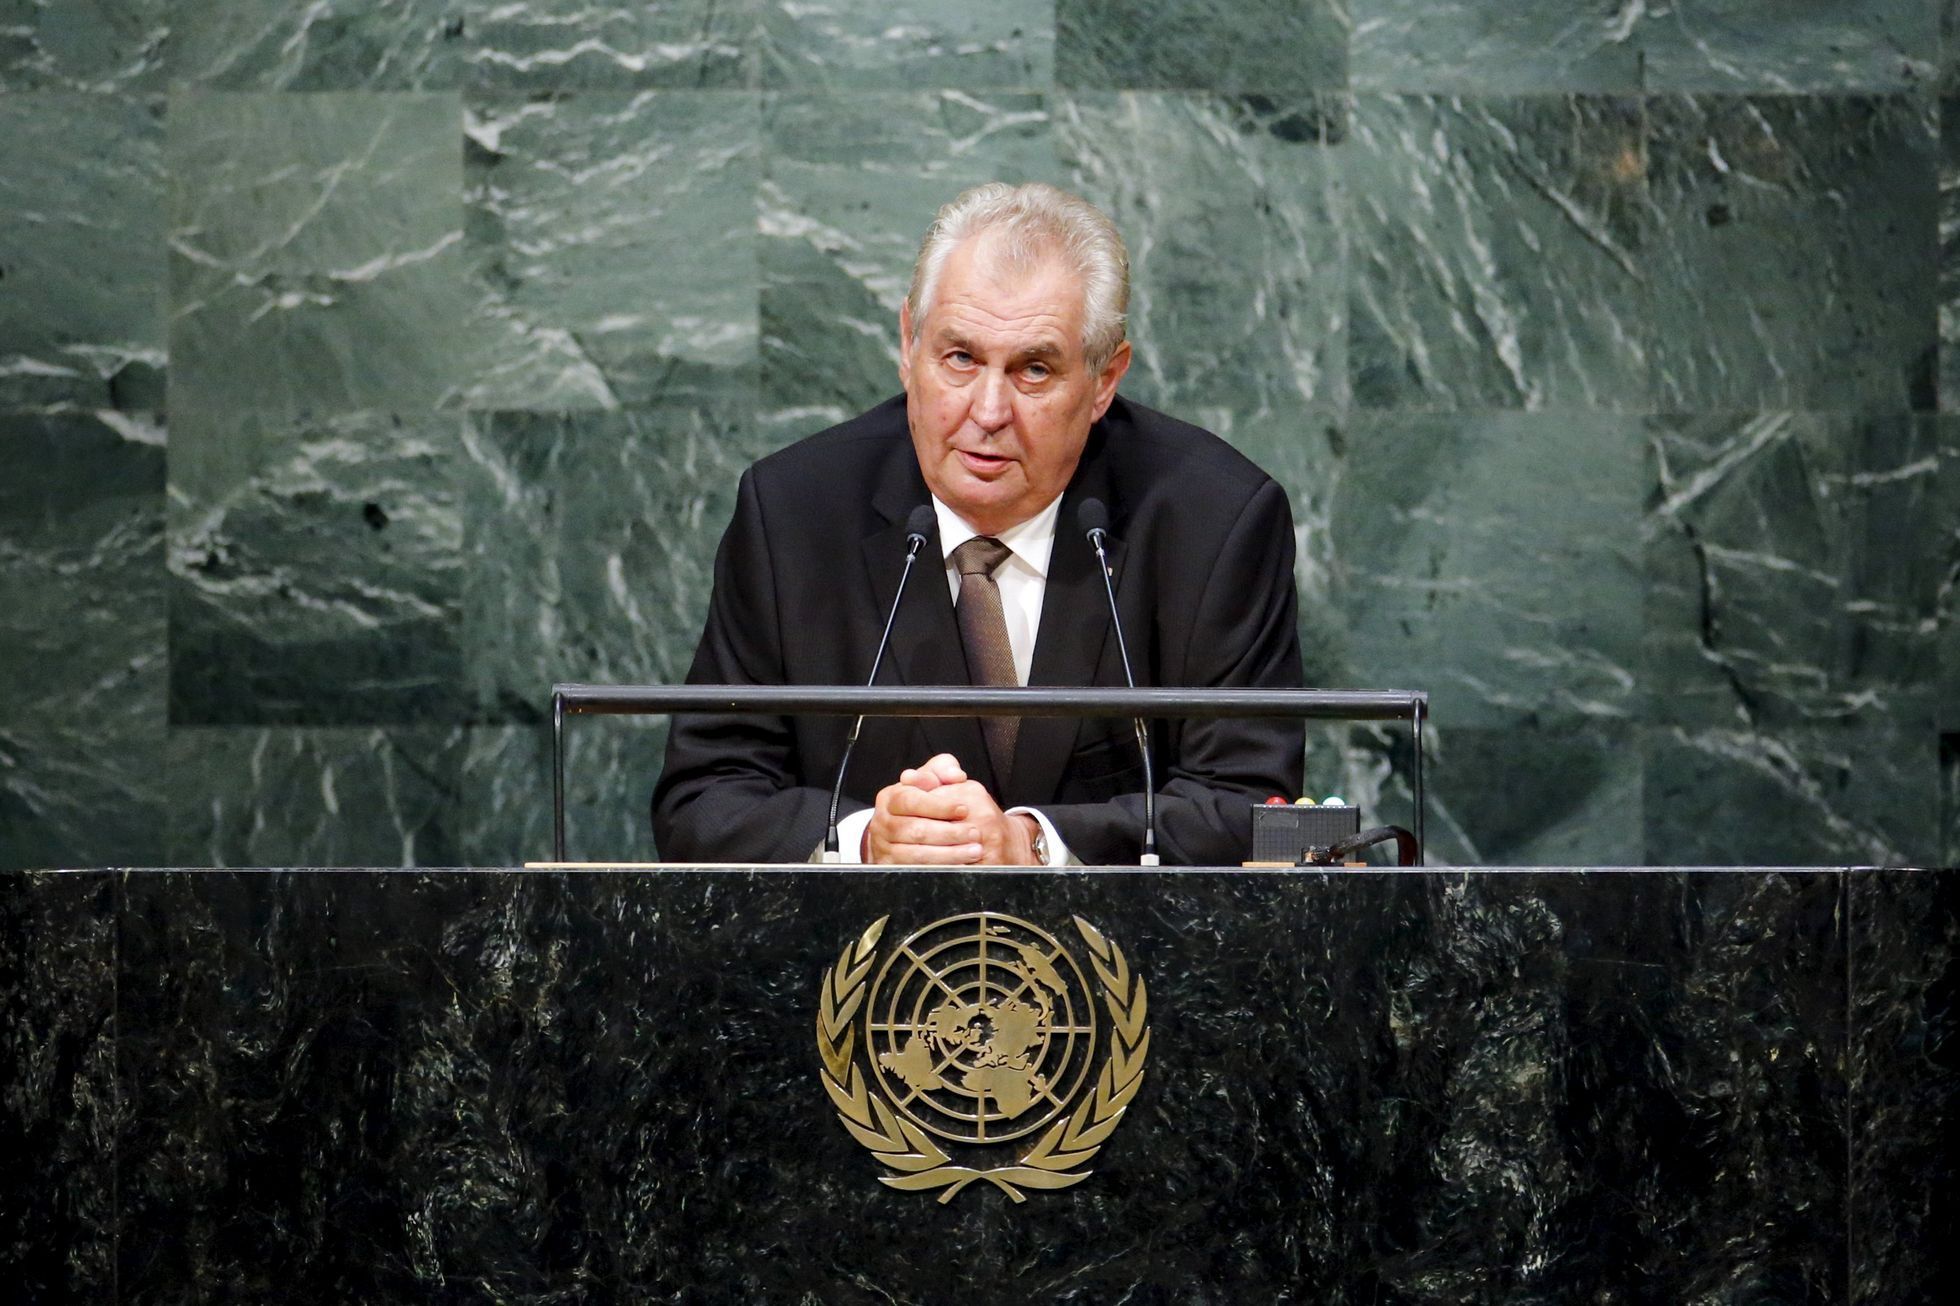 Czech President Milos Zeman speaks during the 70th session of the United Nations General Assembly at the U.N. Headquarters in New York